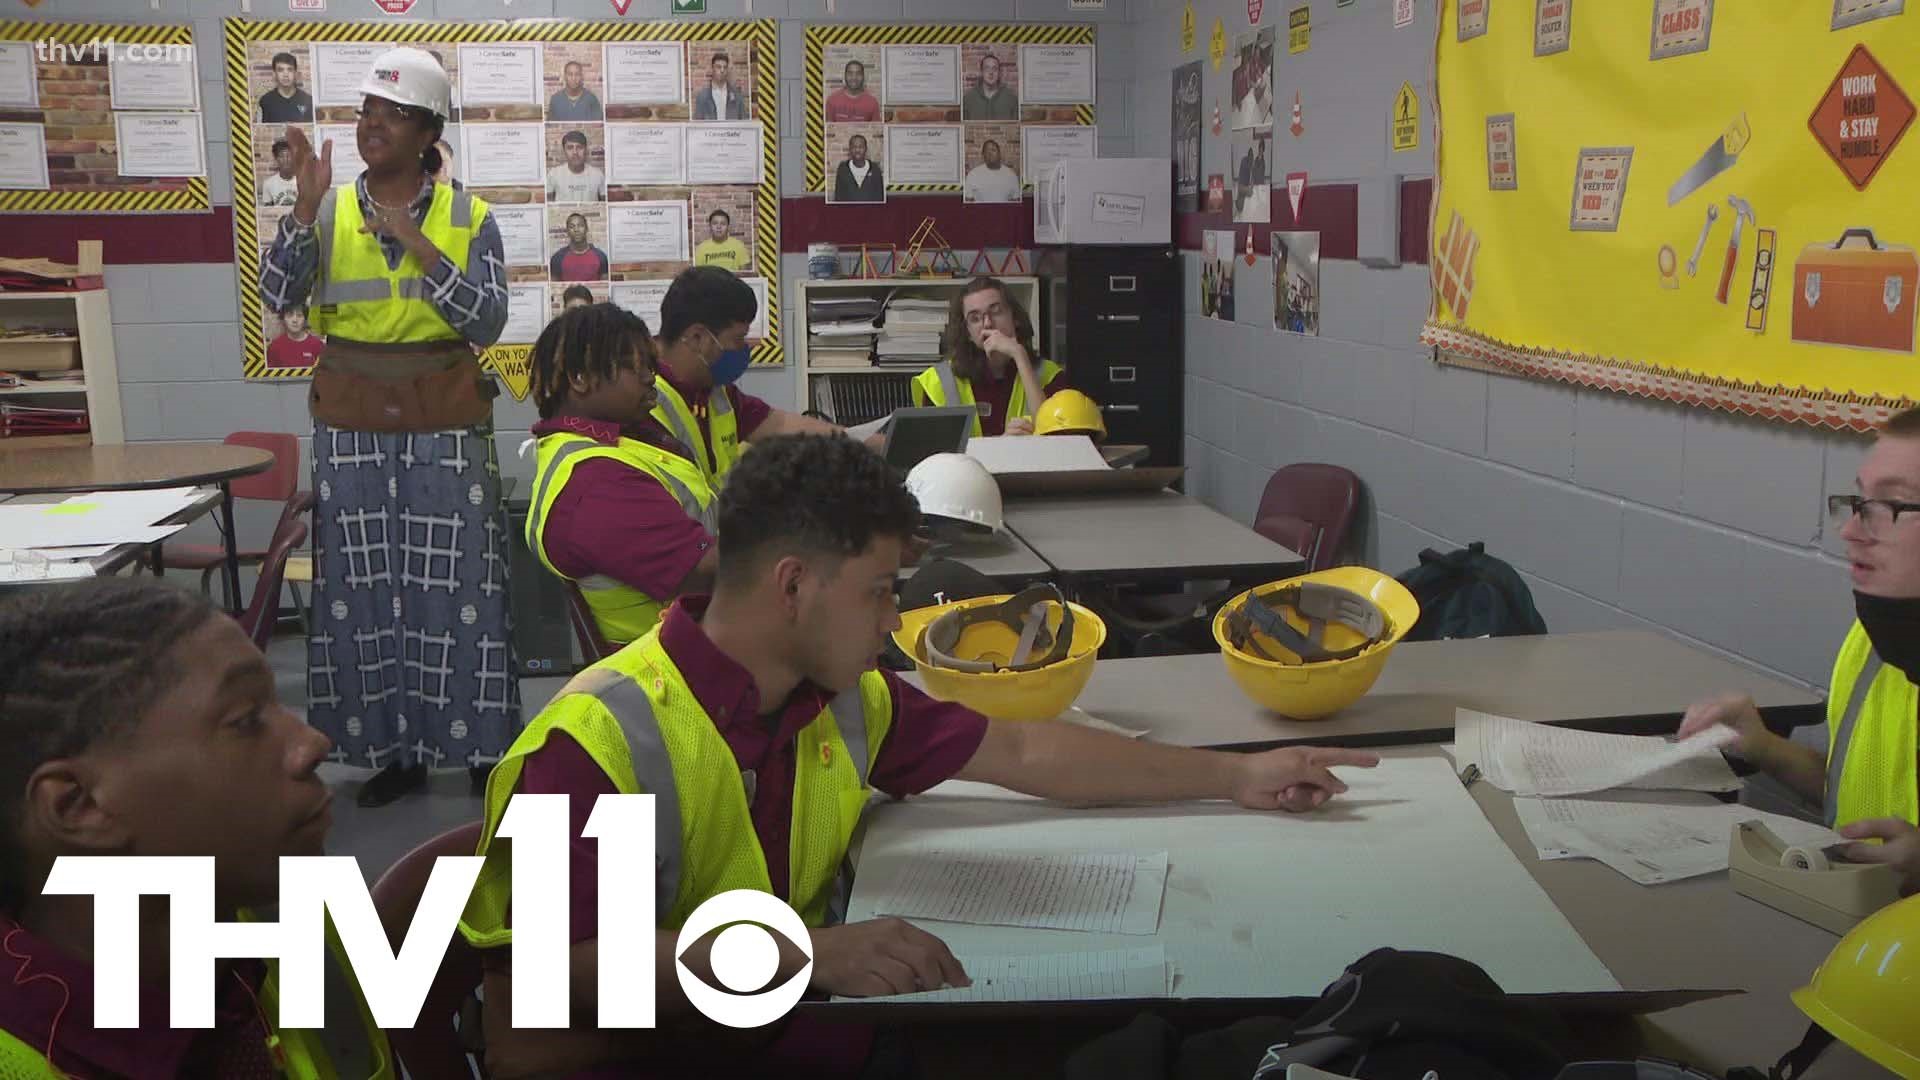 An educator at the Metropolitan Career Technical Center in Little Rock is changing how students learn construction technology in a fun, engaging class.